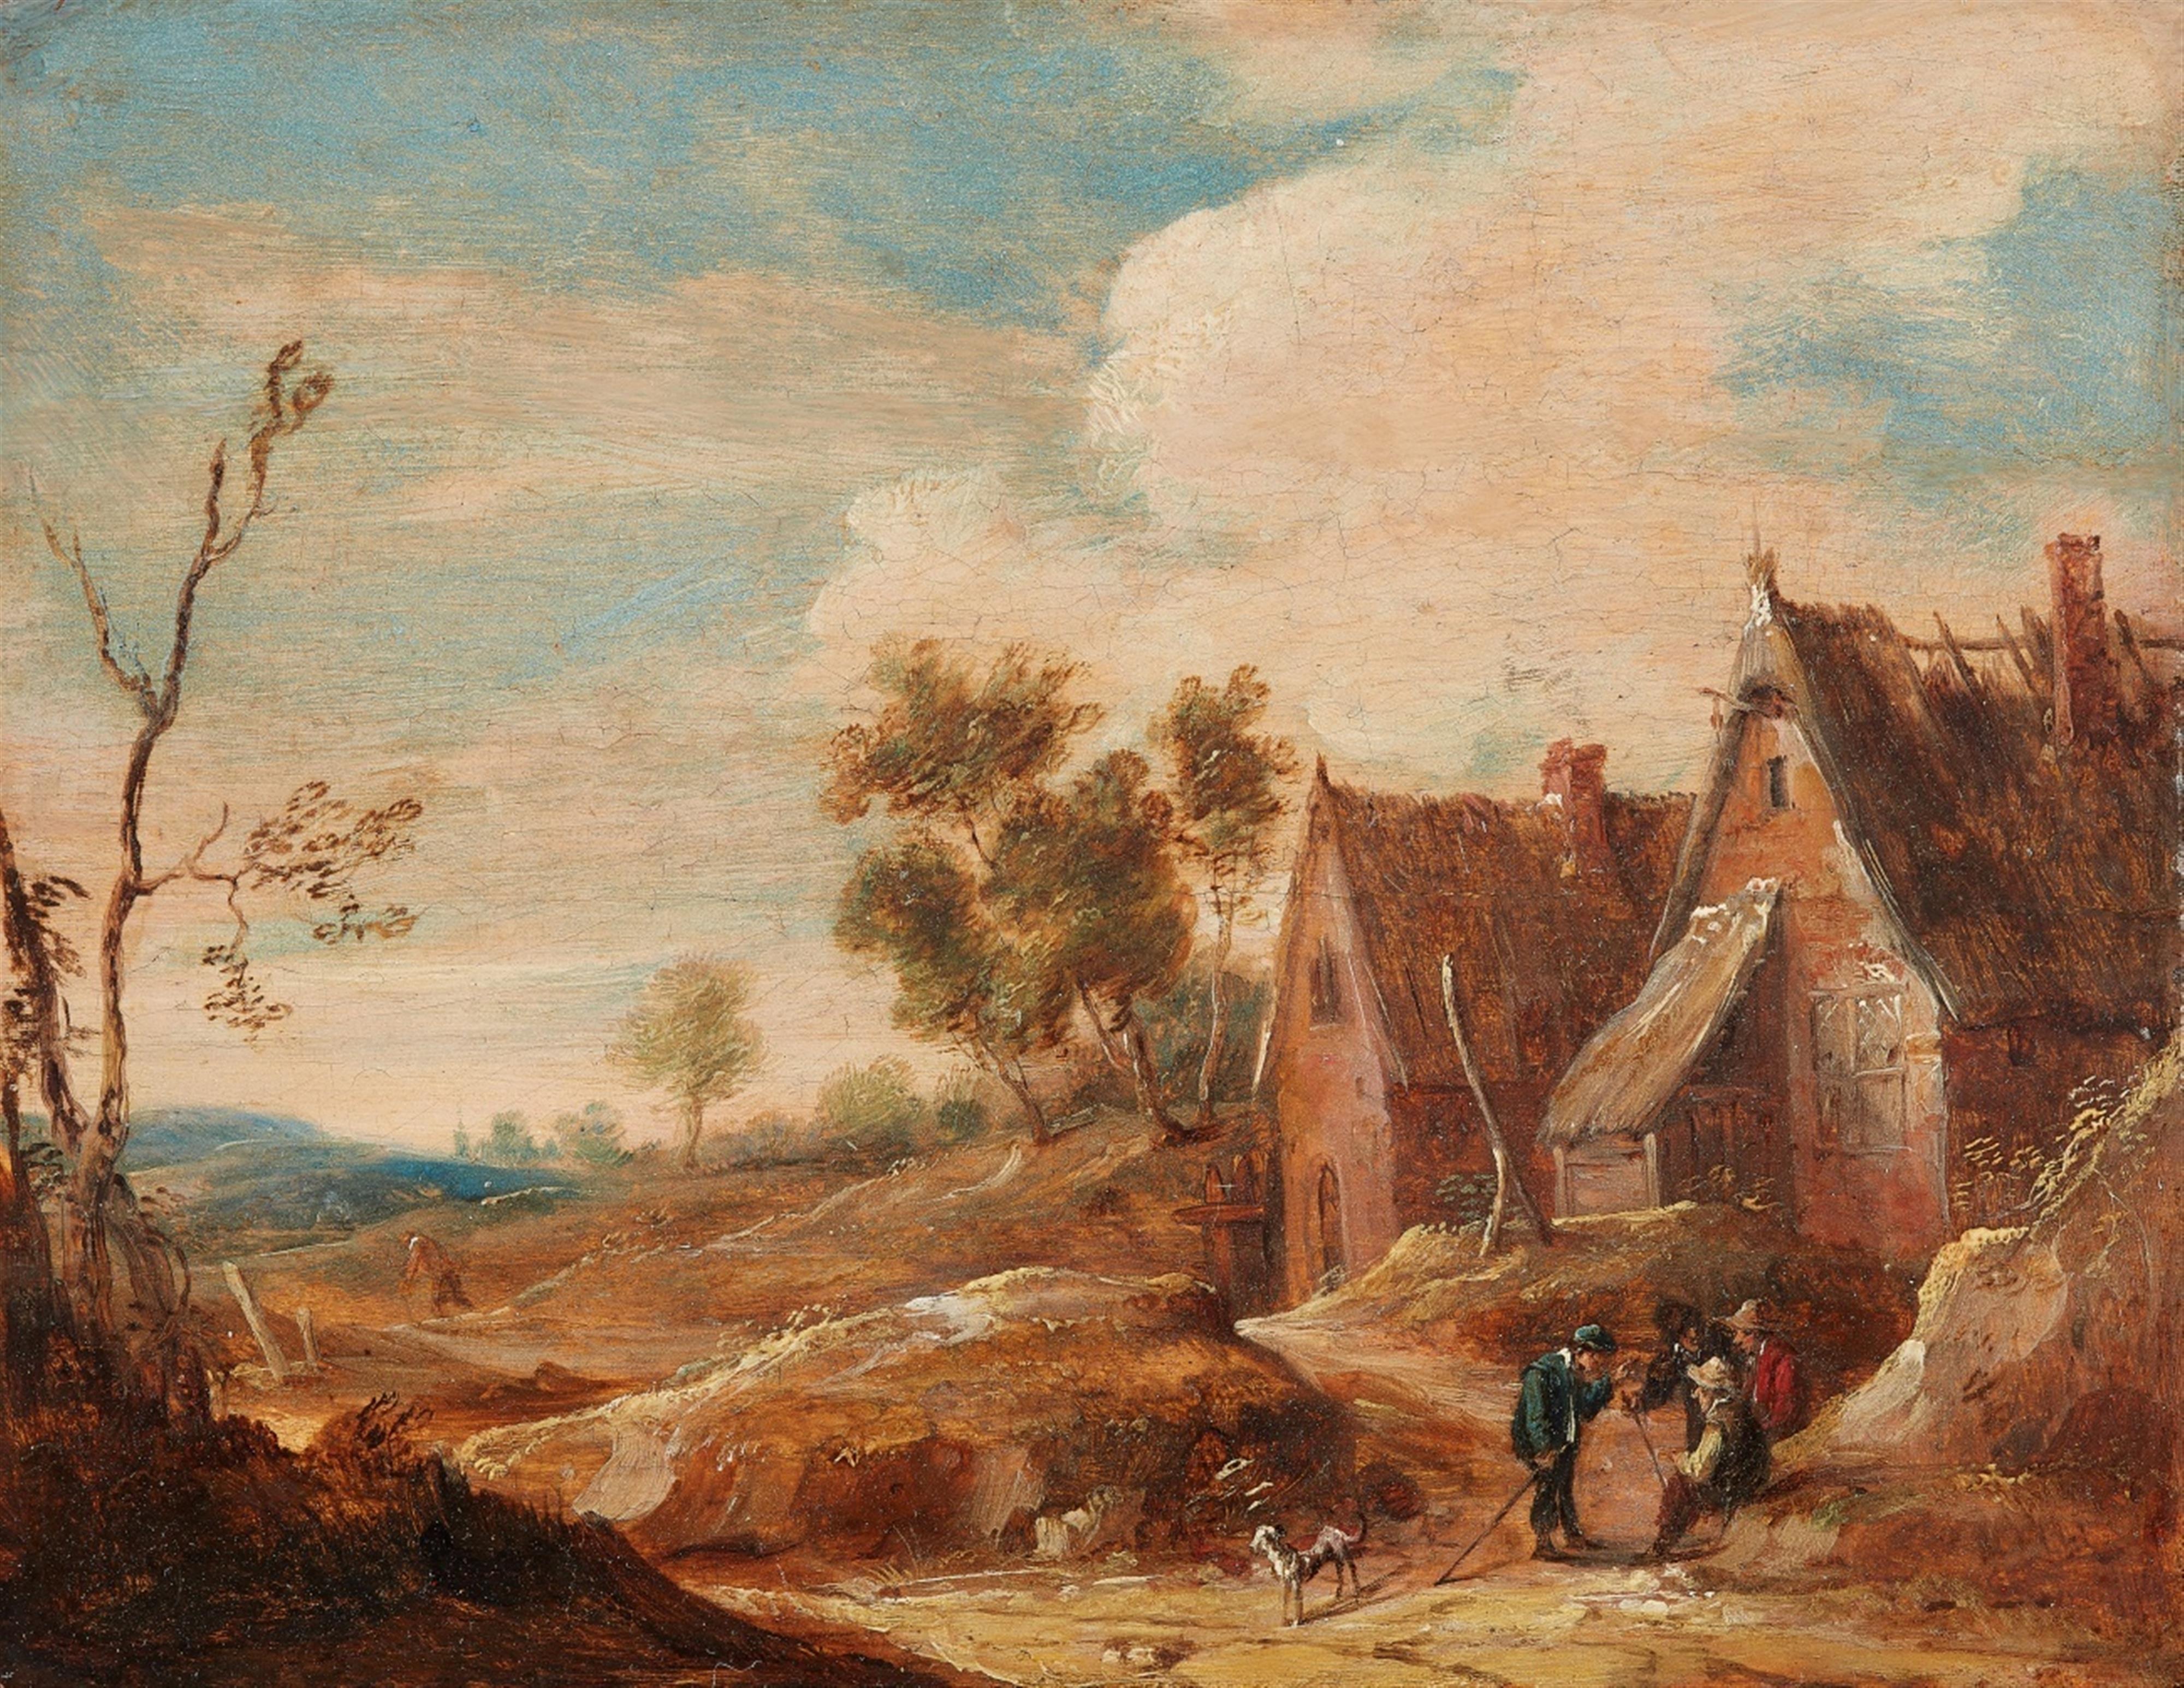 Flemish School, 17th century - Small Landscape with a Farmstead - image-1